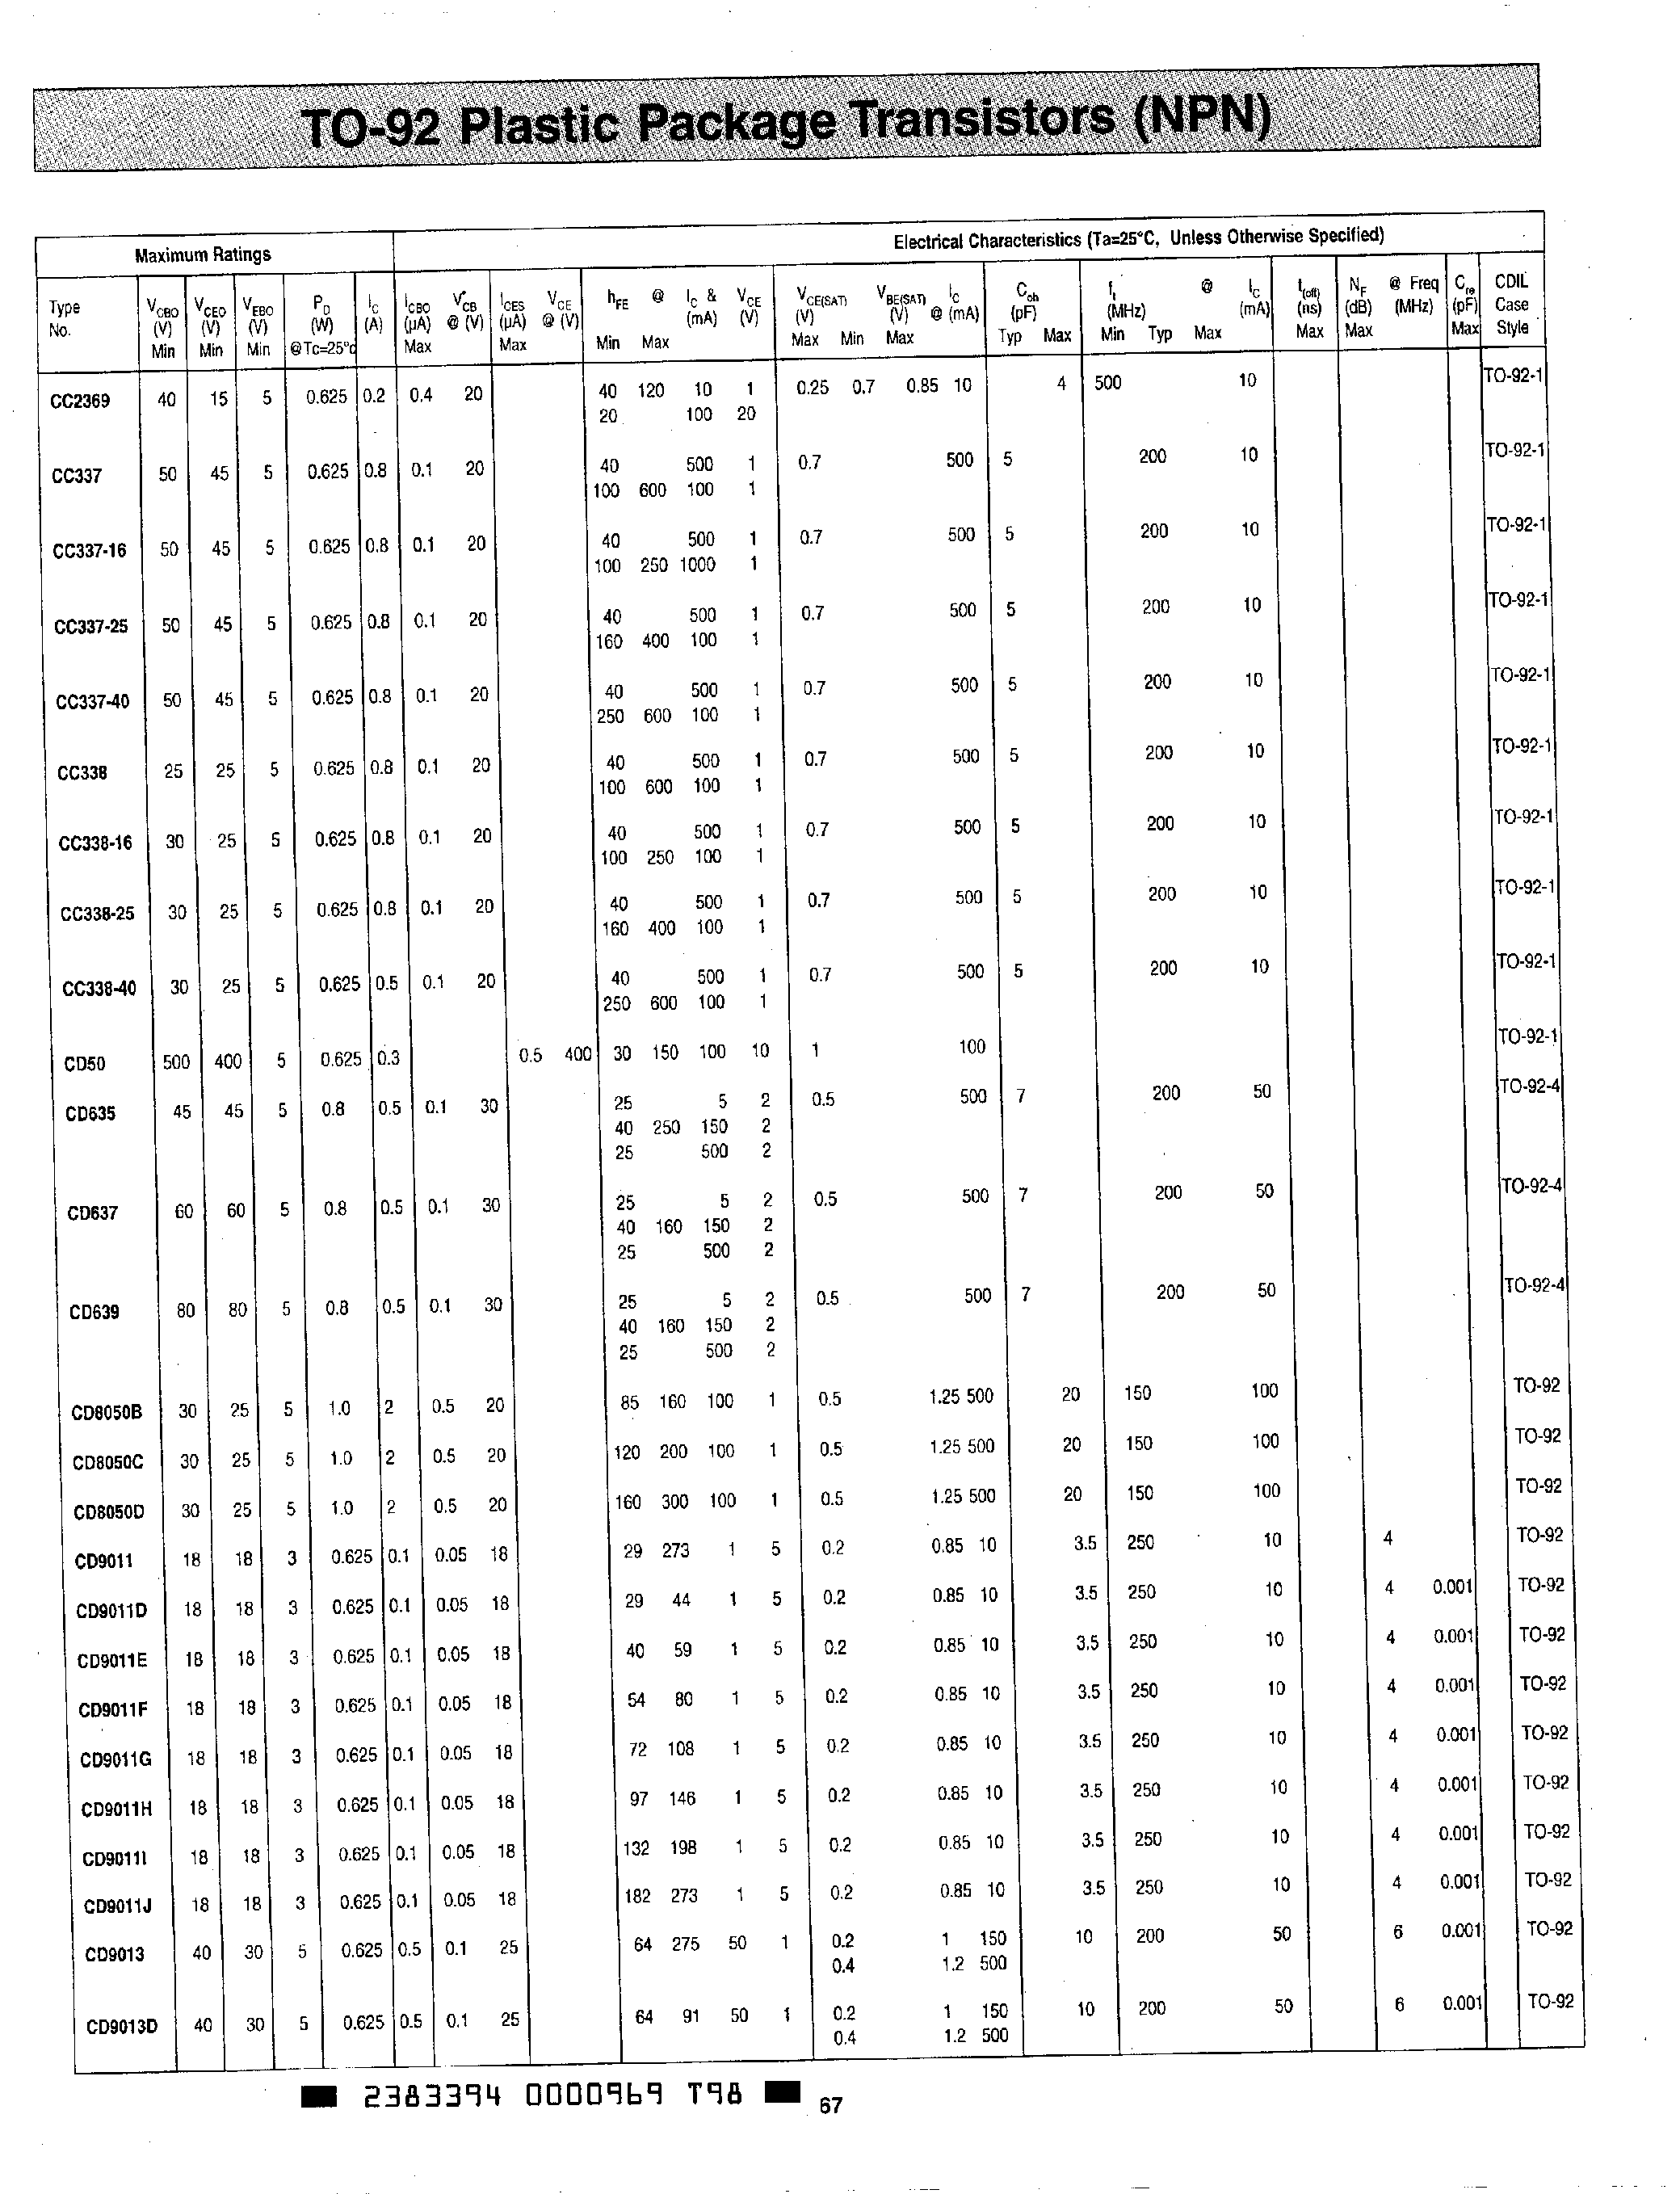 Datasheet BF195 - TO-92 Plastic Package Transistors page 2